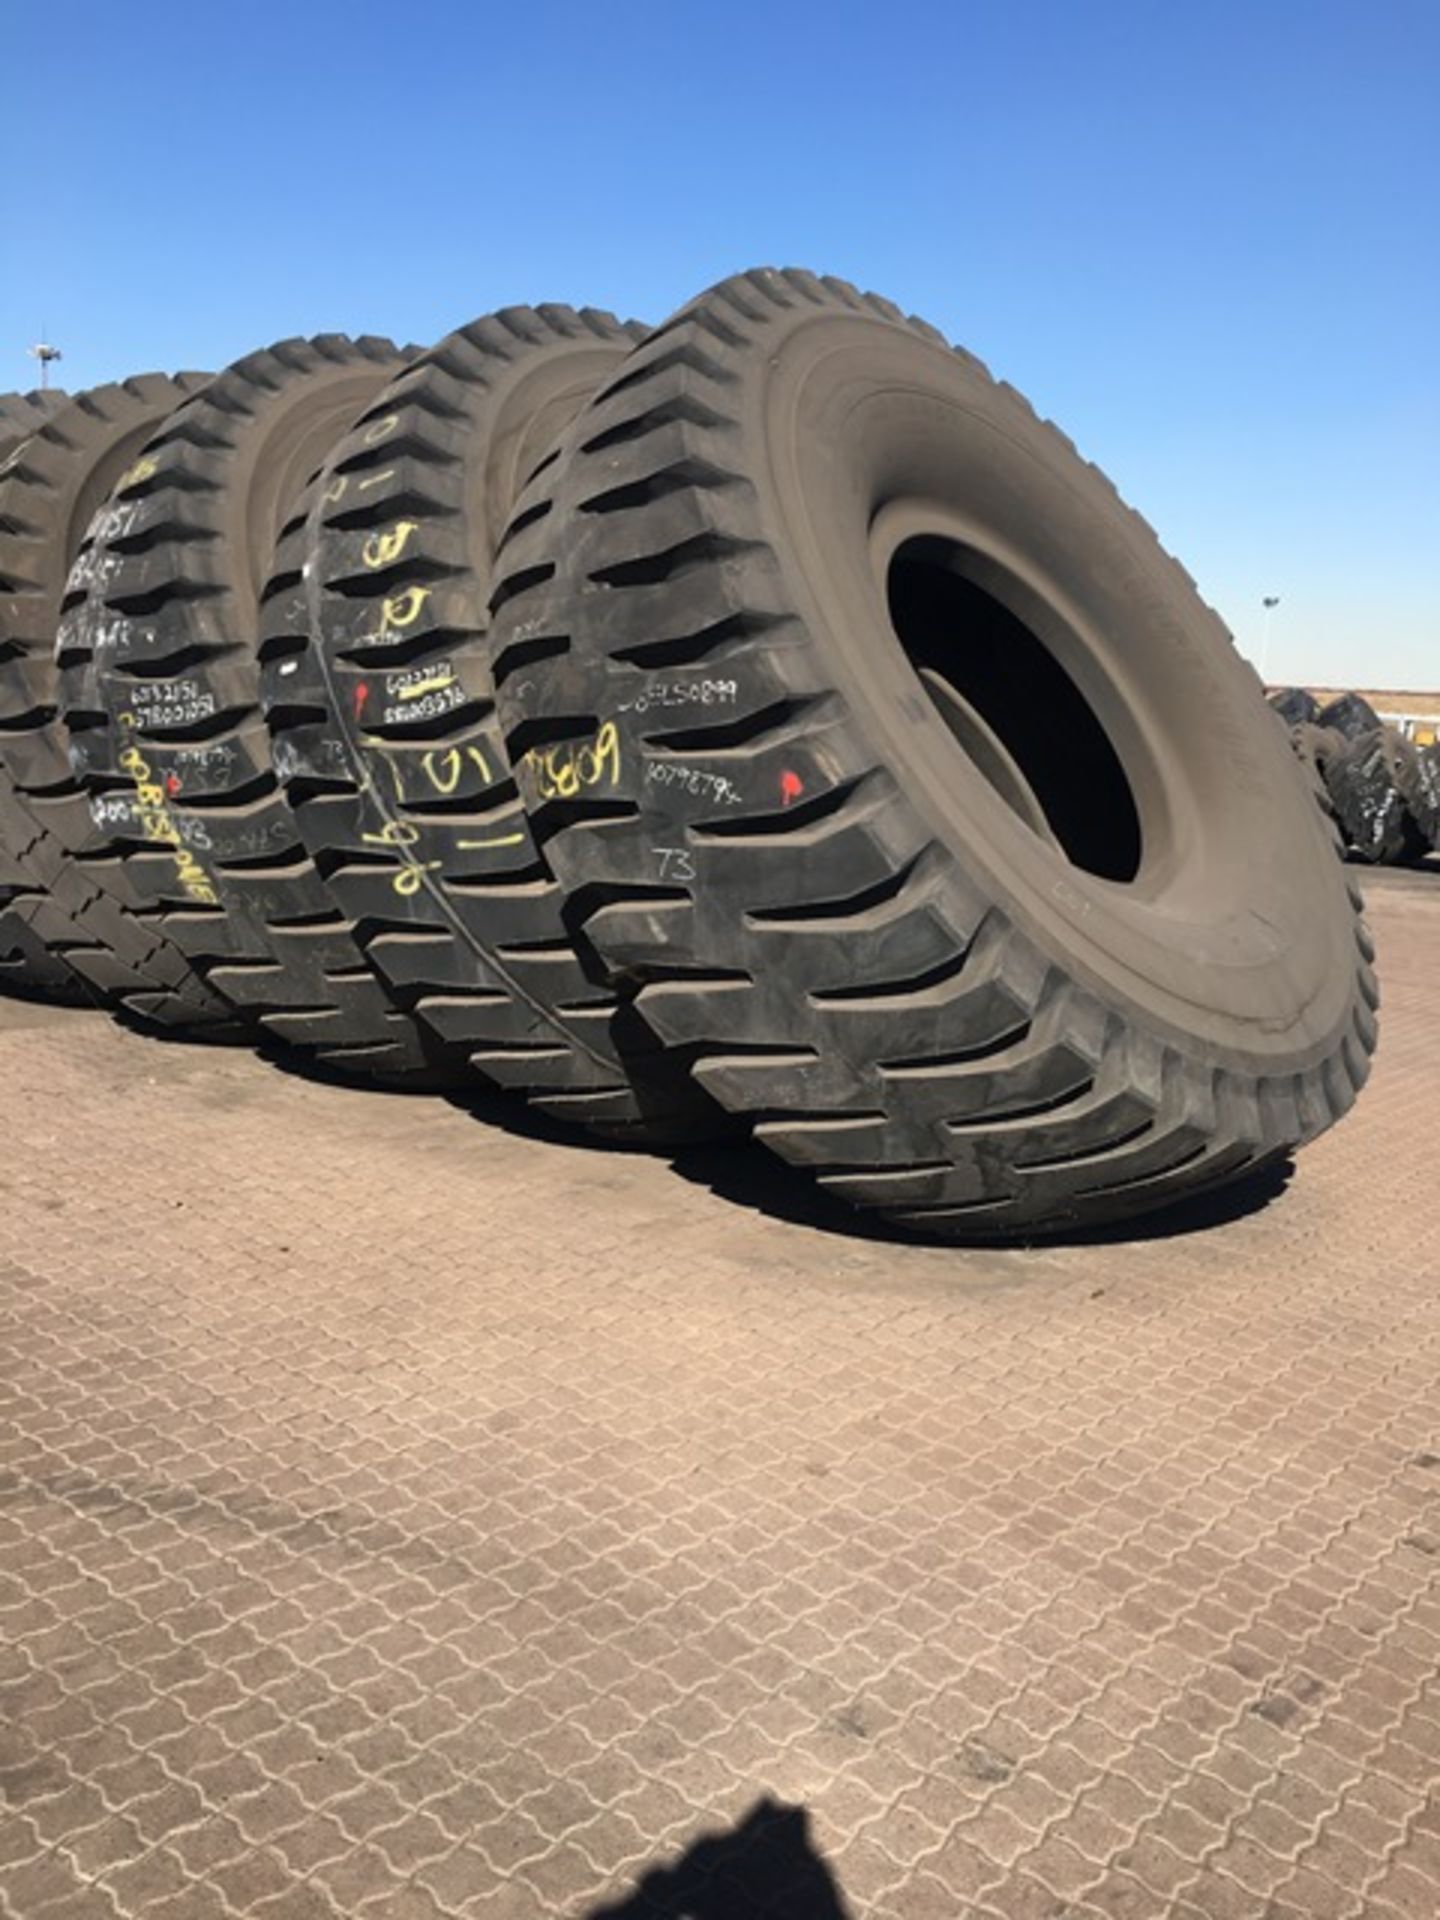 3 X BRIDGESTONE40.00 R57 TYRES - TO BE SOLD AS ONE LOT (LOCATED IN MIDDELBURG, MPUMALANGA)